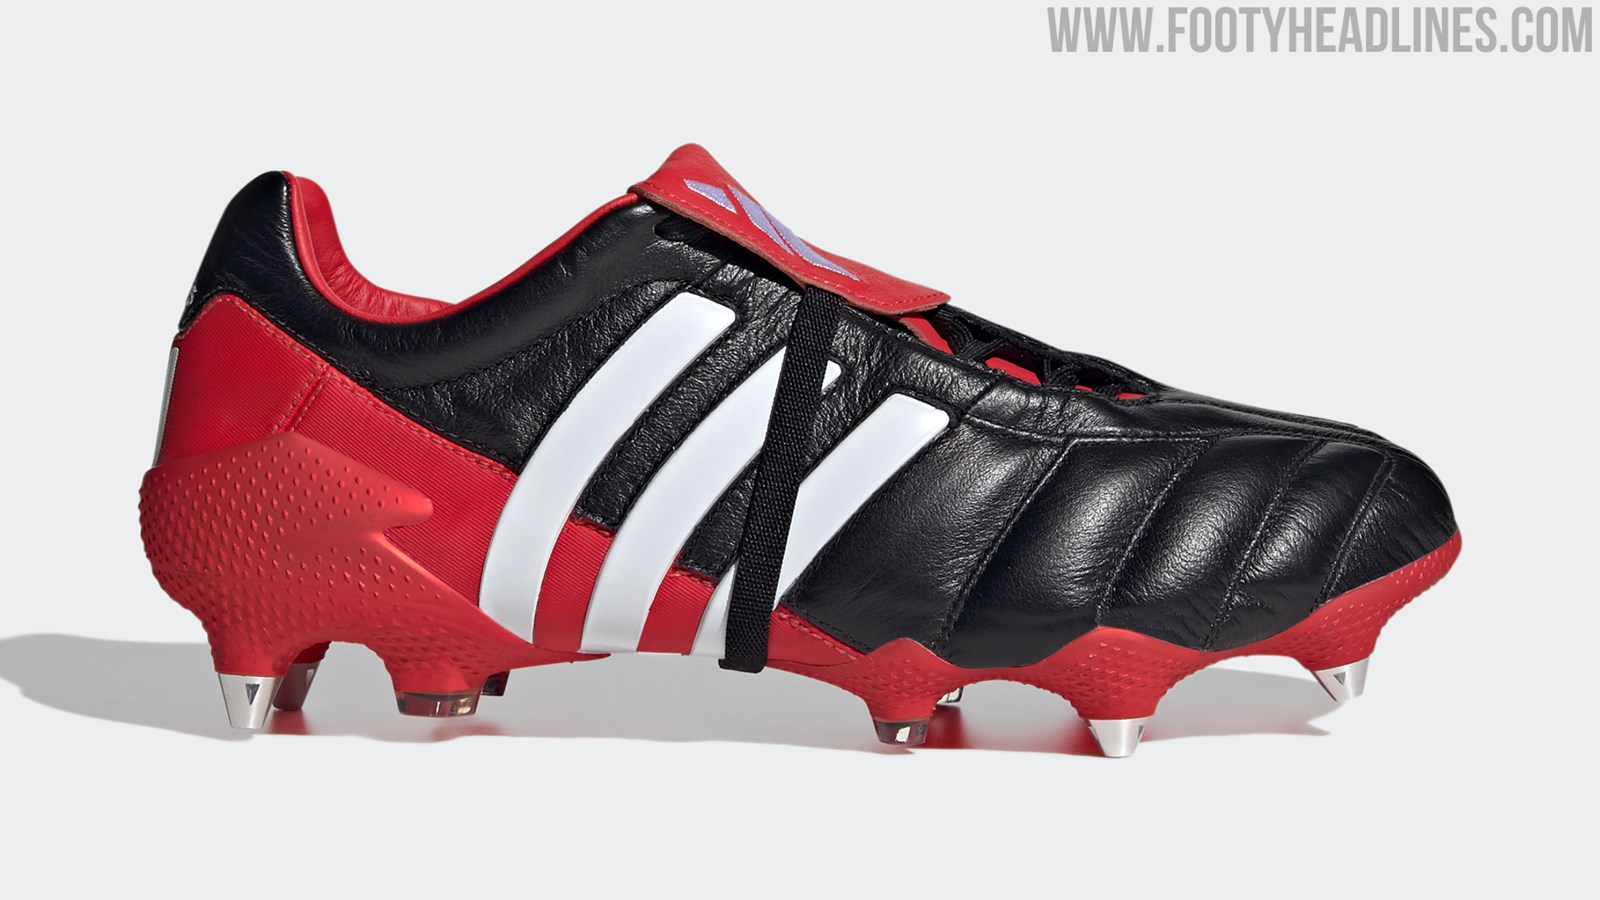 Predator Mania SG Remake Boots Released - Just 2,002 Available - Footy Headlines